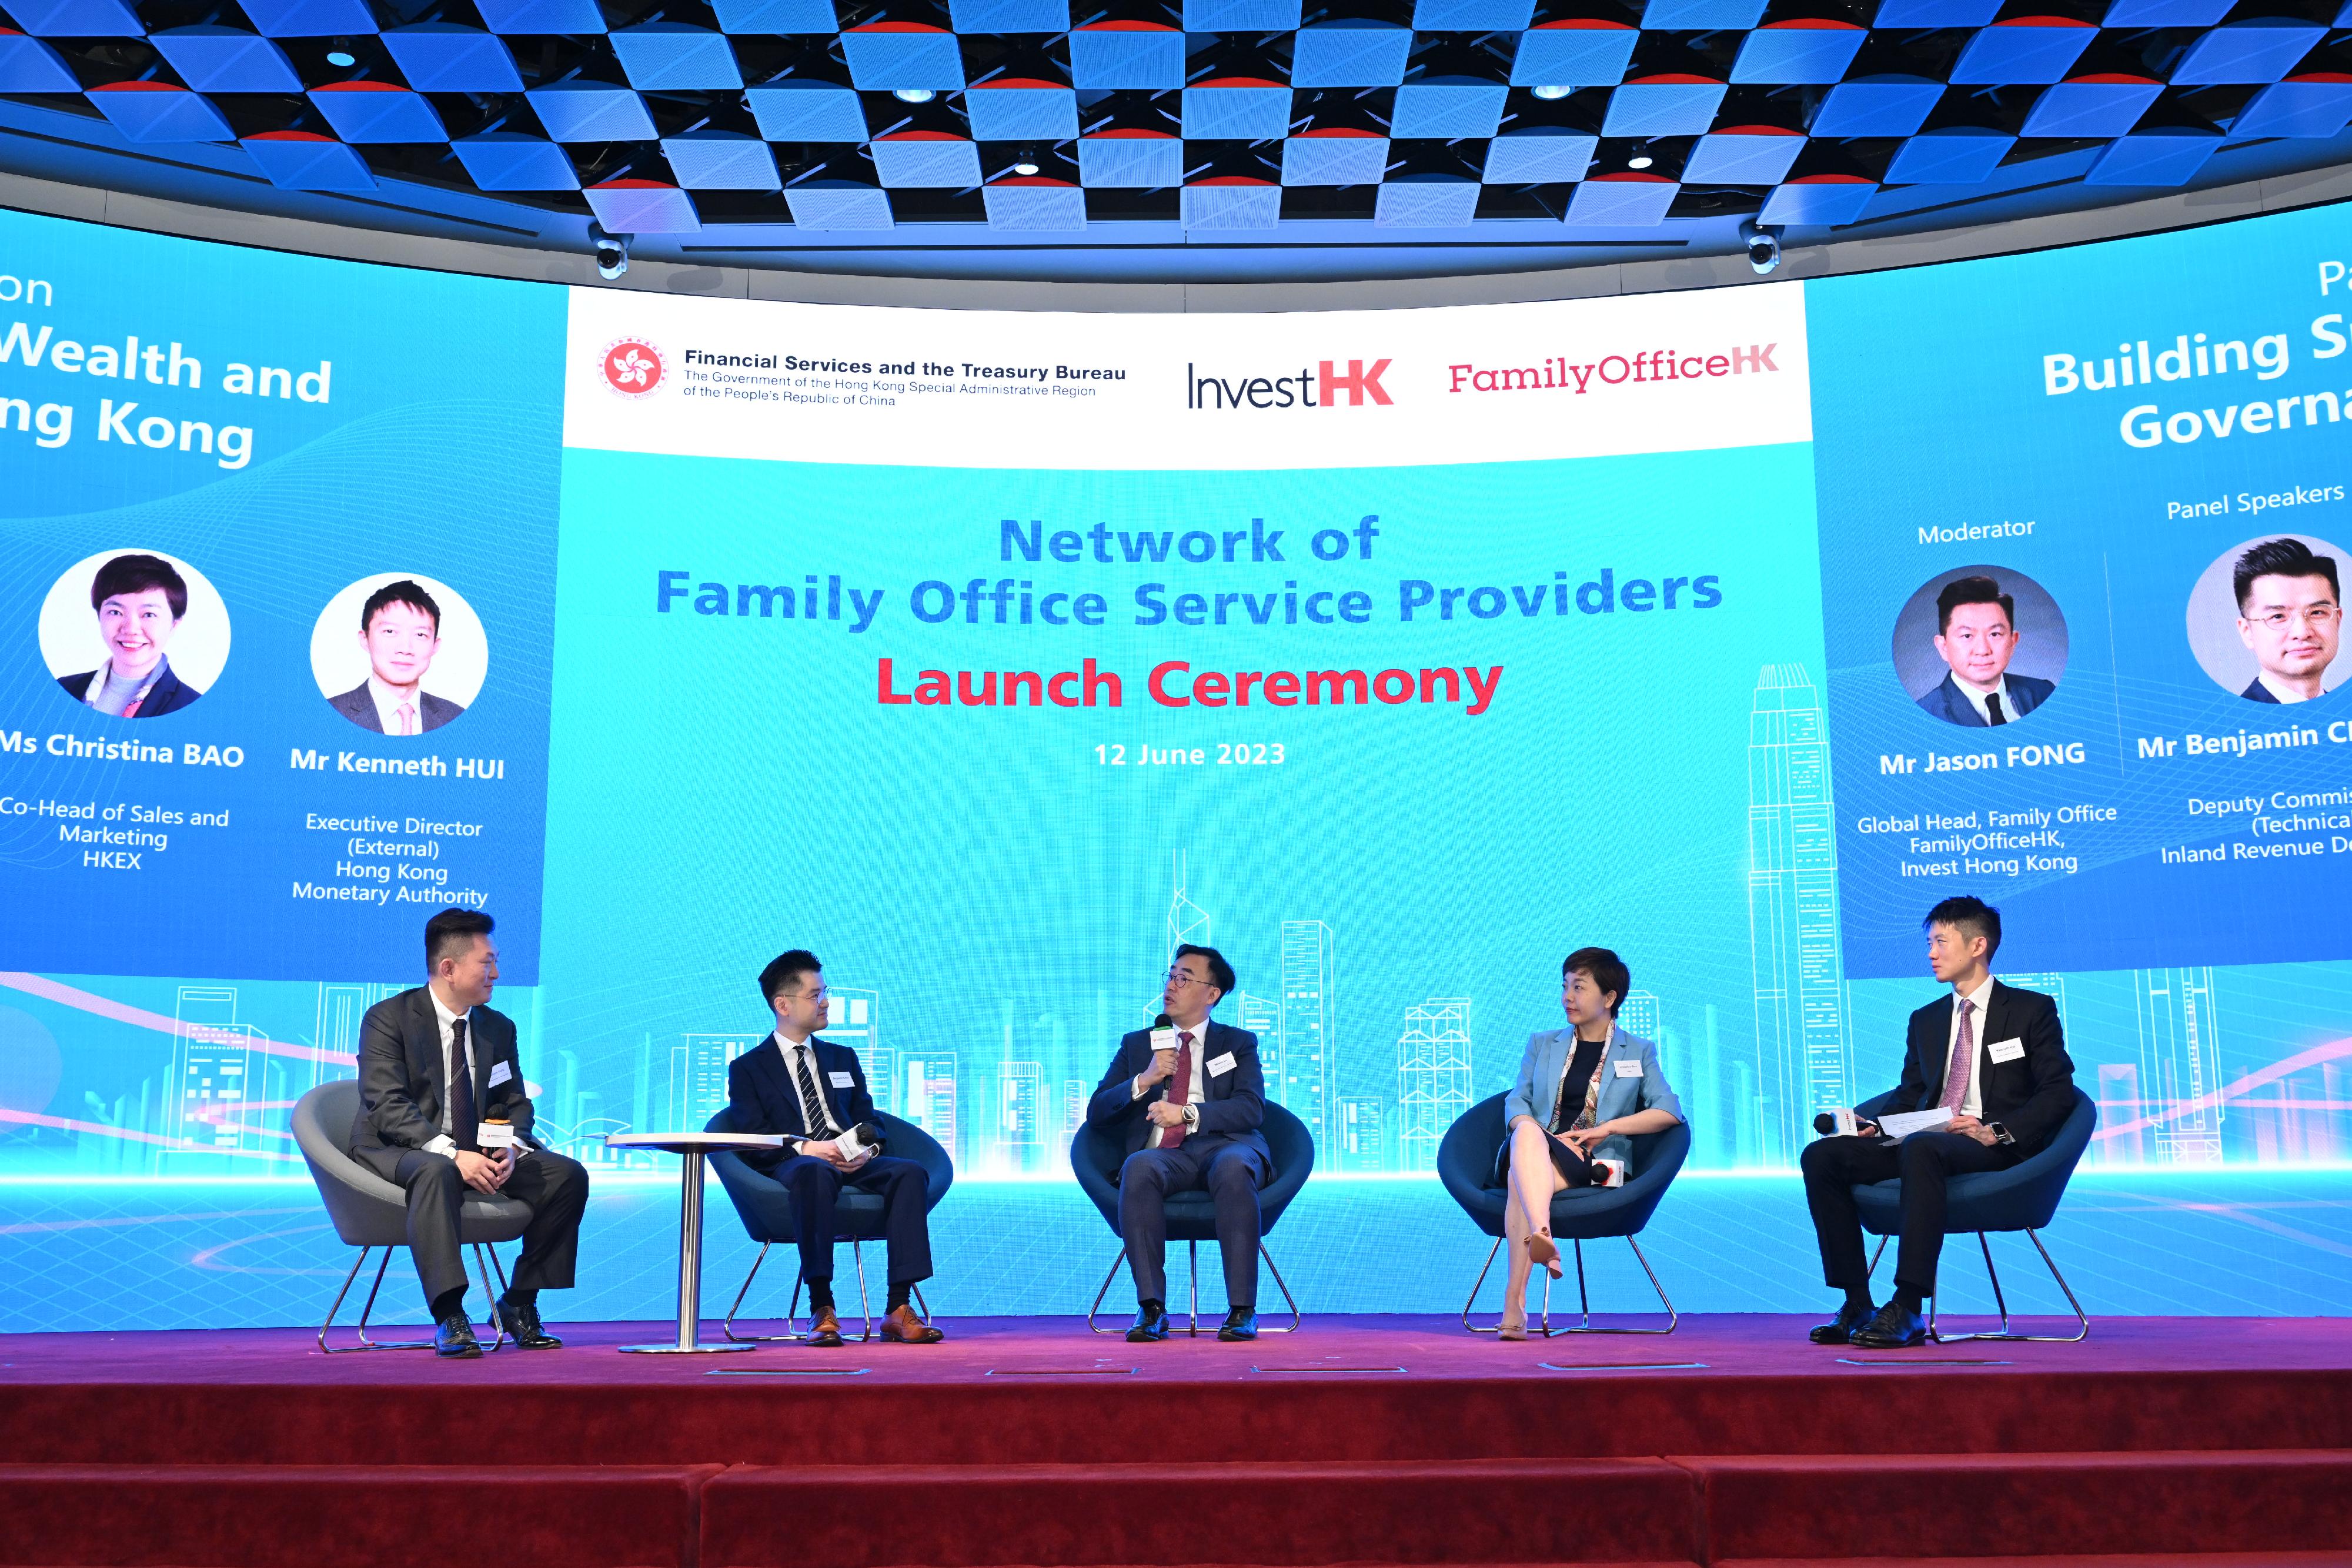 Invest Hong Kong announced today (June 12) the launch of the Network of Family Office Service Providers and held a panel discussion after the launch ceremony. The Deputy Commissioner (Technical) of the Inland Revenue Department, Mr Benjamin Chan (second left); Senior Director of Licensing of the Intermediaries of Securities and Futures Commission Mr Wilson Lo (centre); Co-Head of Sales and Marketing of the Hong Kong Exchanges and Clearing Limited Ms Christina Bao (second right); and the Executive Director (External) of the Hong Kong Monetary Authority, Mr Kenneth Hui (first right), share their views on a wide range of topics regarding family office business in Hong Kong, including tax concessions, the Government's support for tech-listings and the future of green finance, at the "Building Successful Wealth and Governance in Hong Kong" panel discussion, which is moderated by the Global Head of Family Office of Invest Hong Kong's FamilyOfficeHK, Mr Jason Fong (first left).